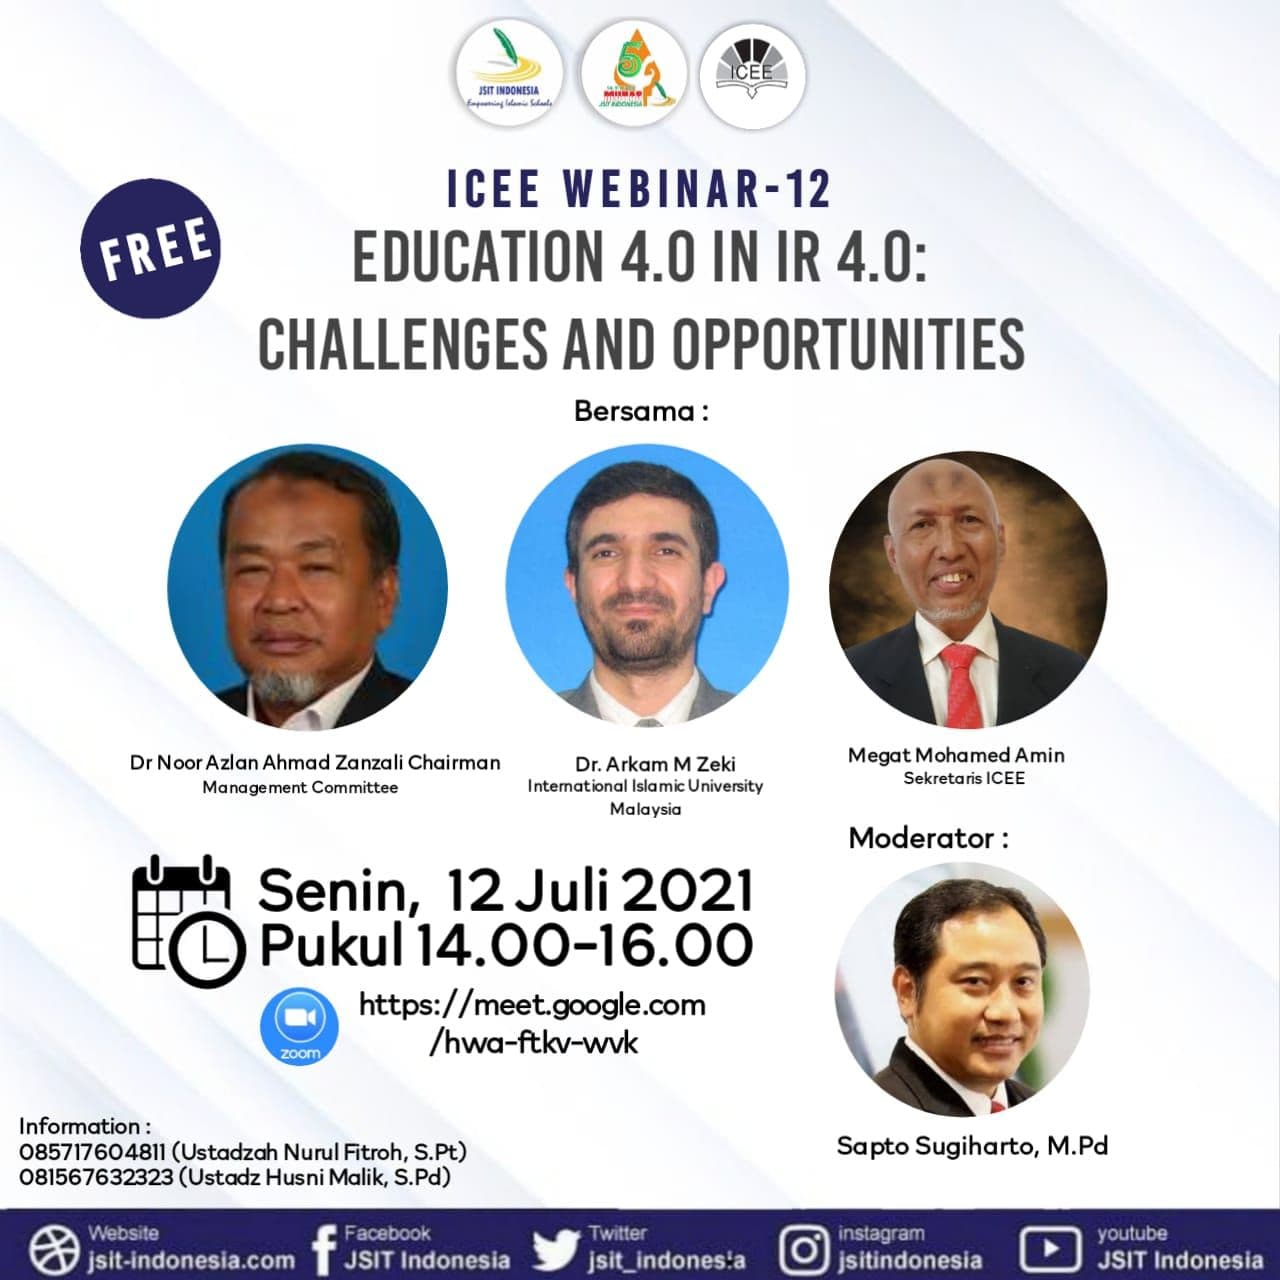 EDUCATION 4.0 IN IR4.0:CHALLENGES AND OPPORTUNITIES